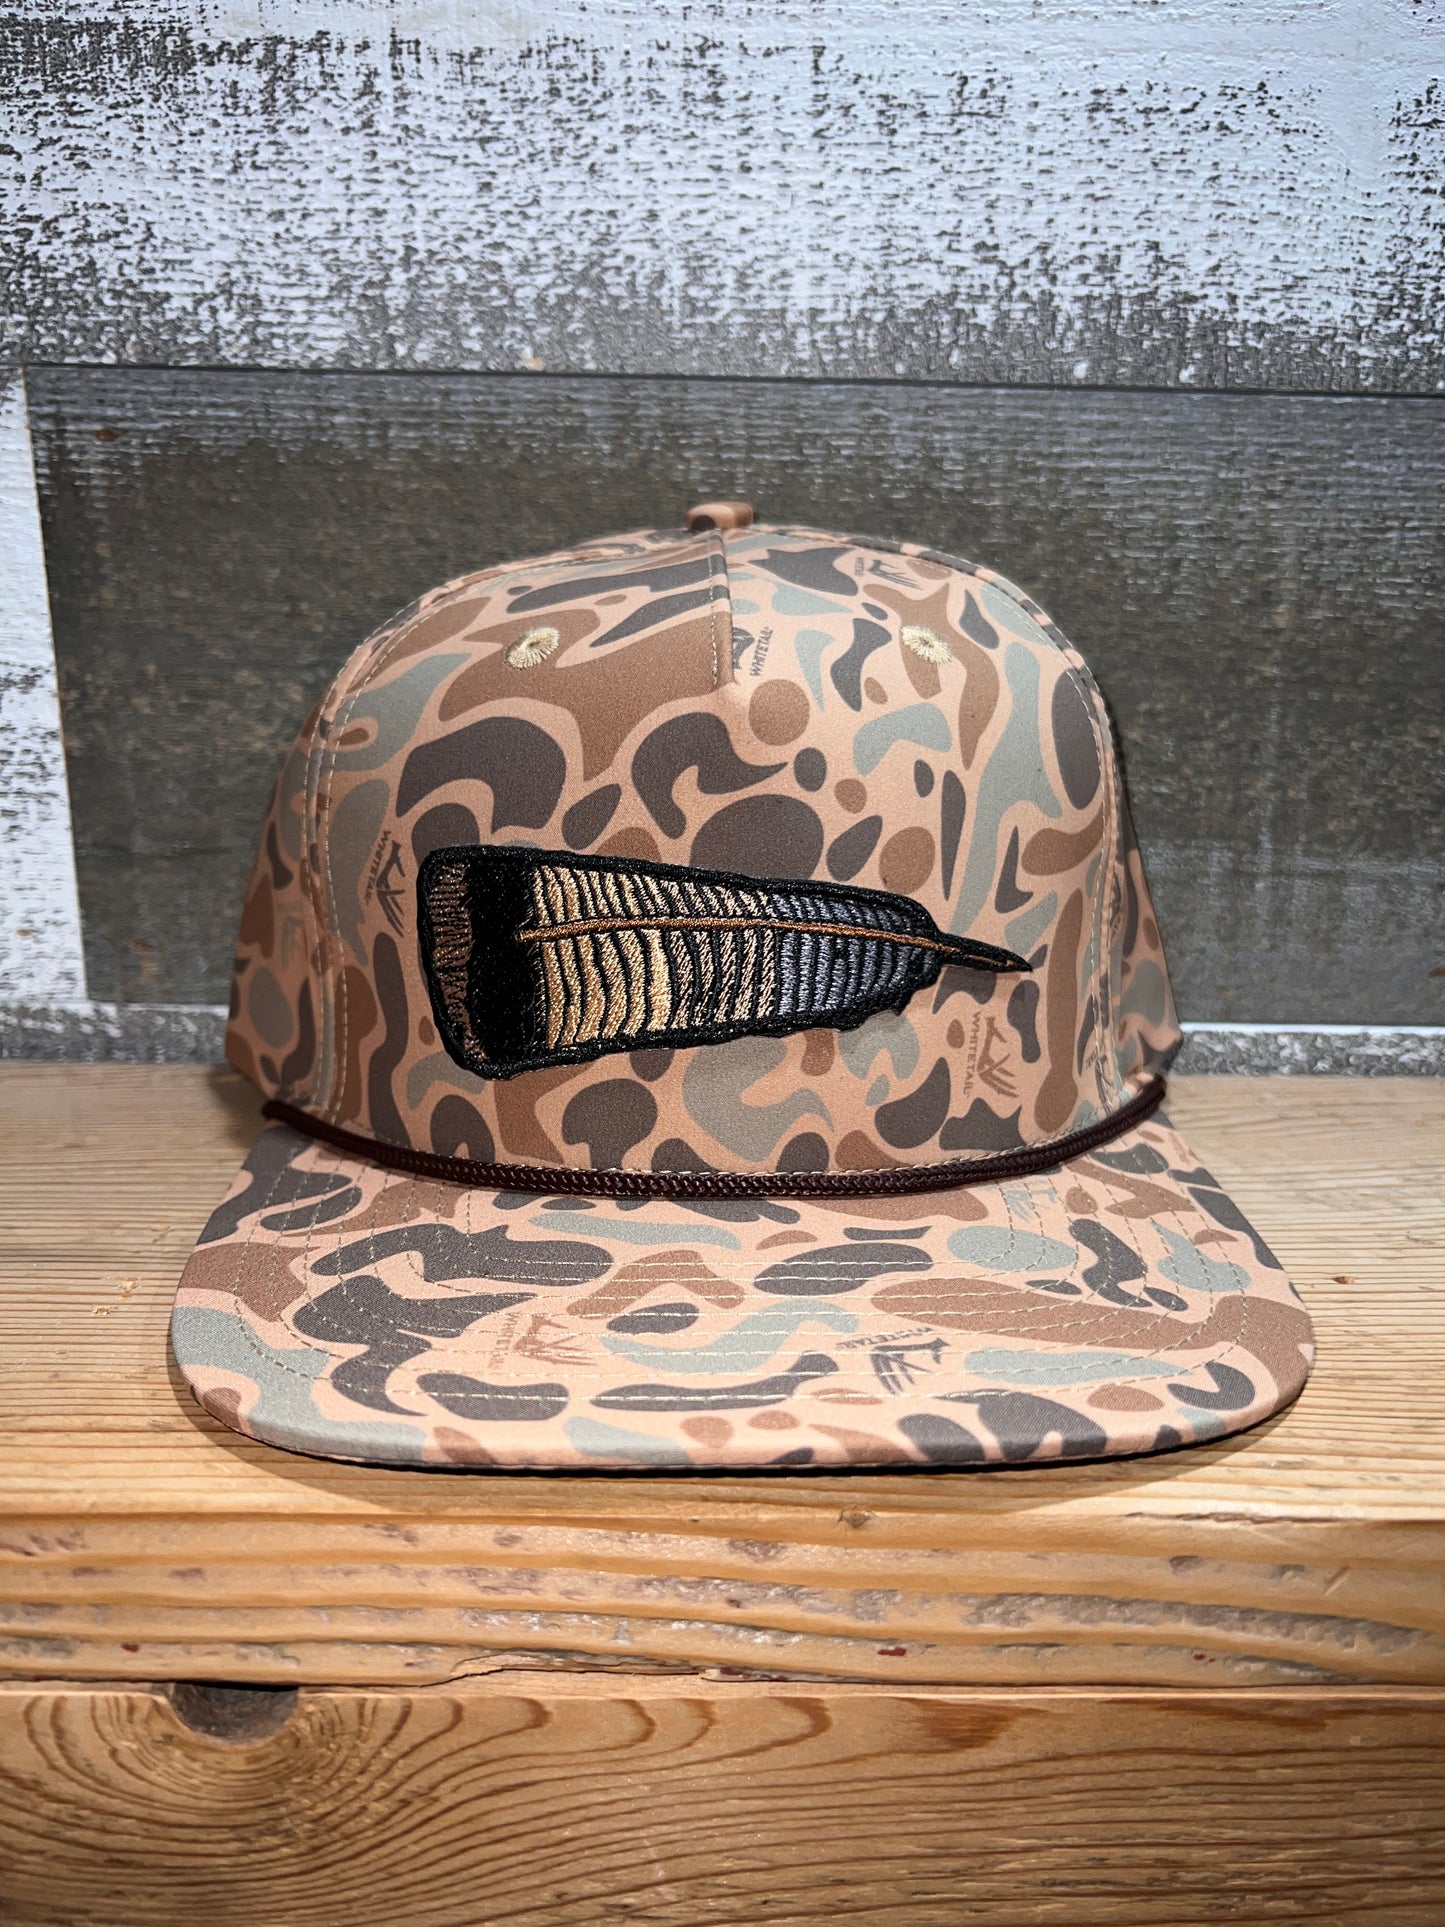 Whitetail Co. Fallen Feather Dark Old Camo Ropy